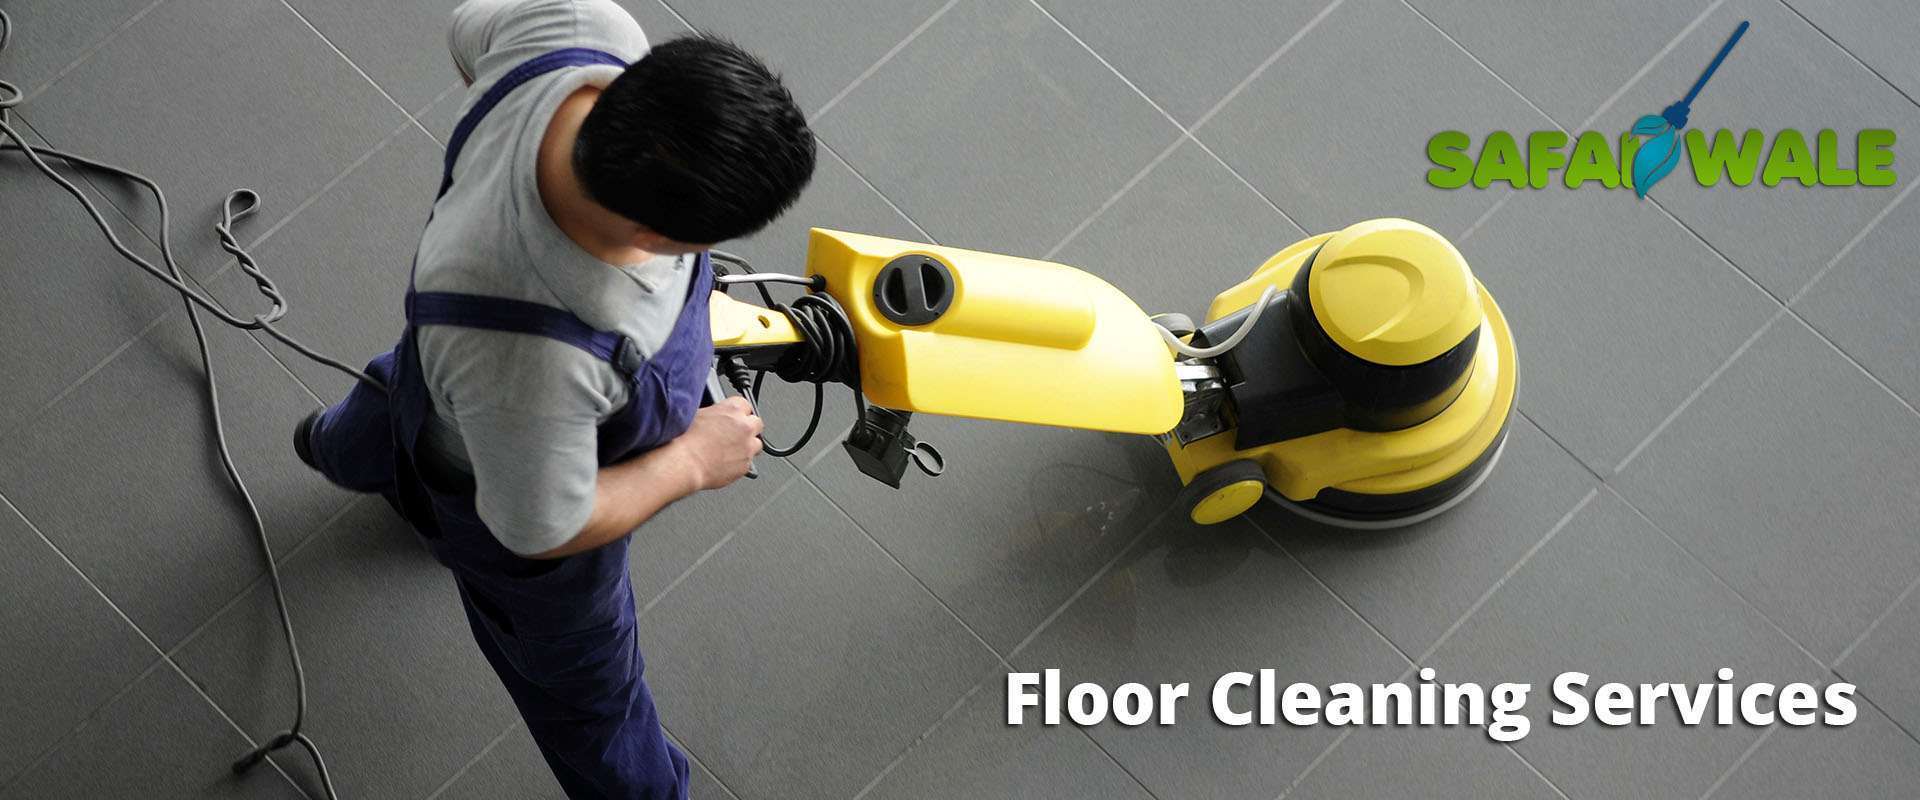 floor cleaning services in delhi ncr